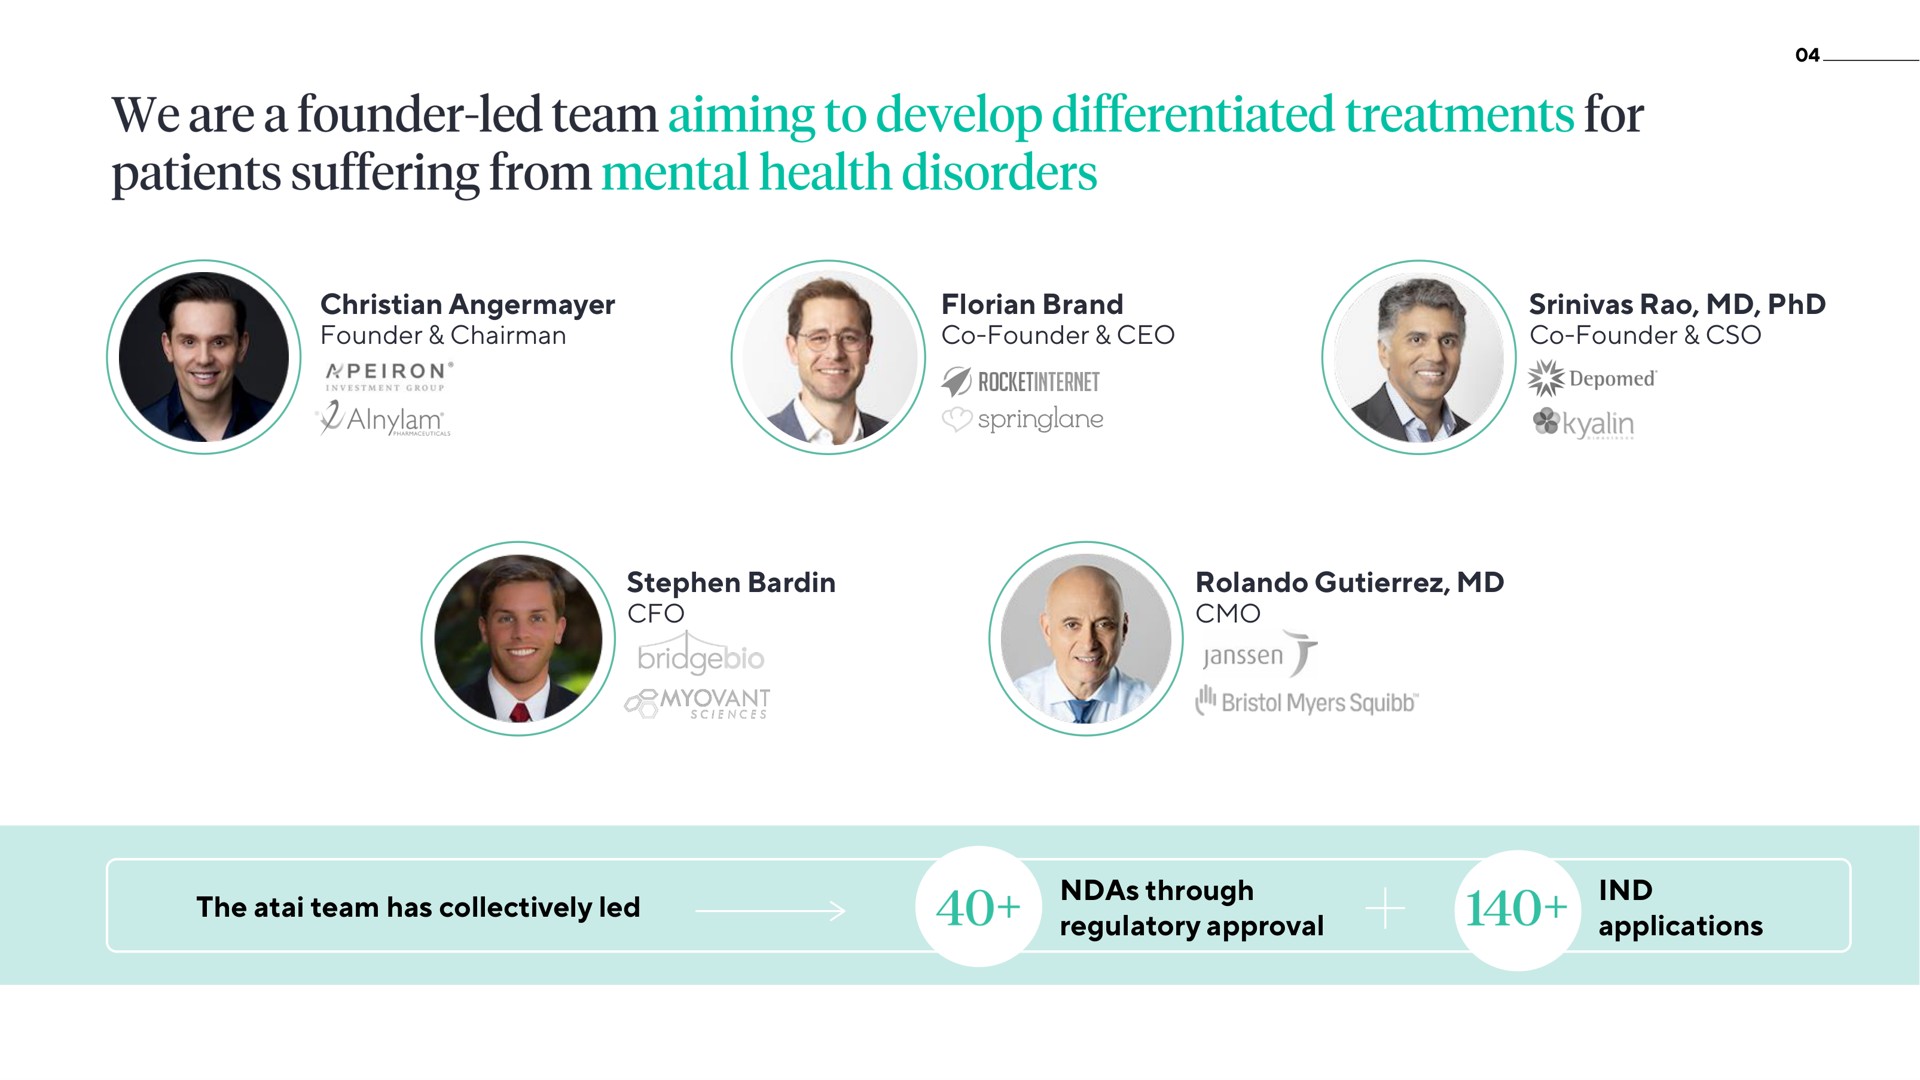 founder chairman brand founder founder the team has collectively led through regulatory approval applications a founder led aiming to develop differentiated treatments for patients suffering from mental health disorders | ATAI